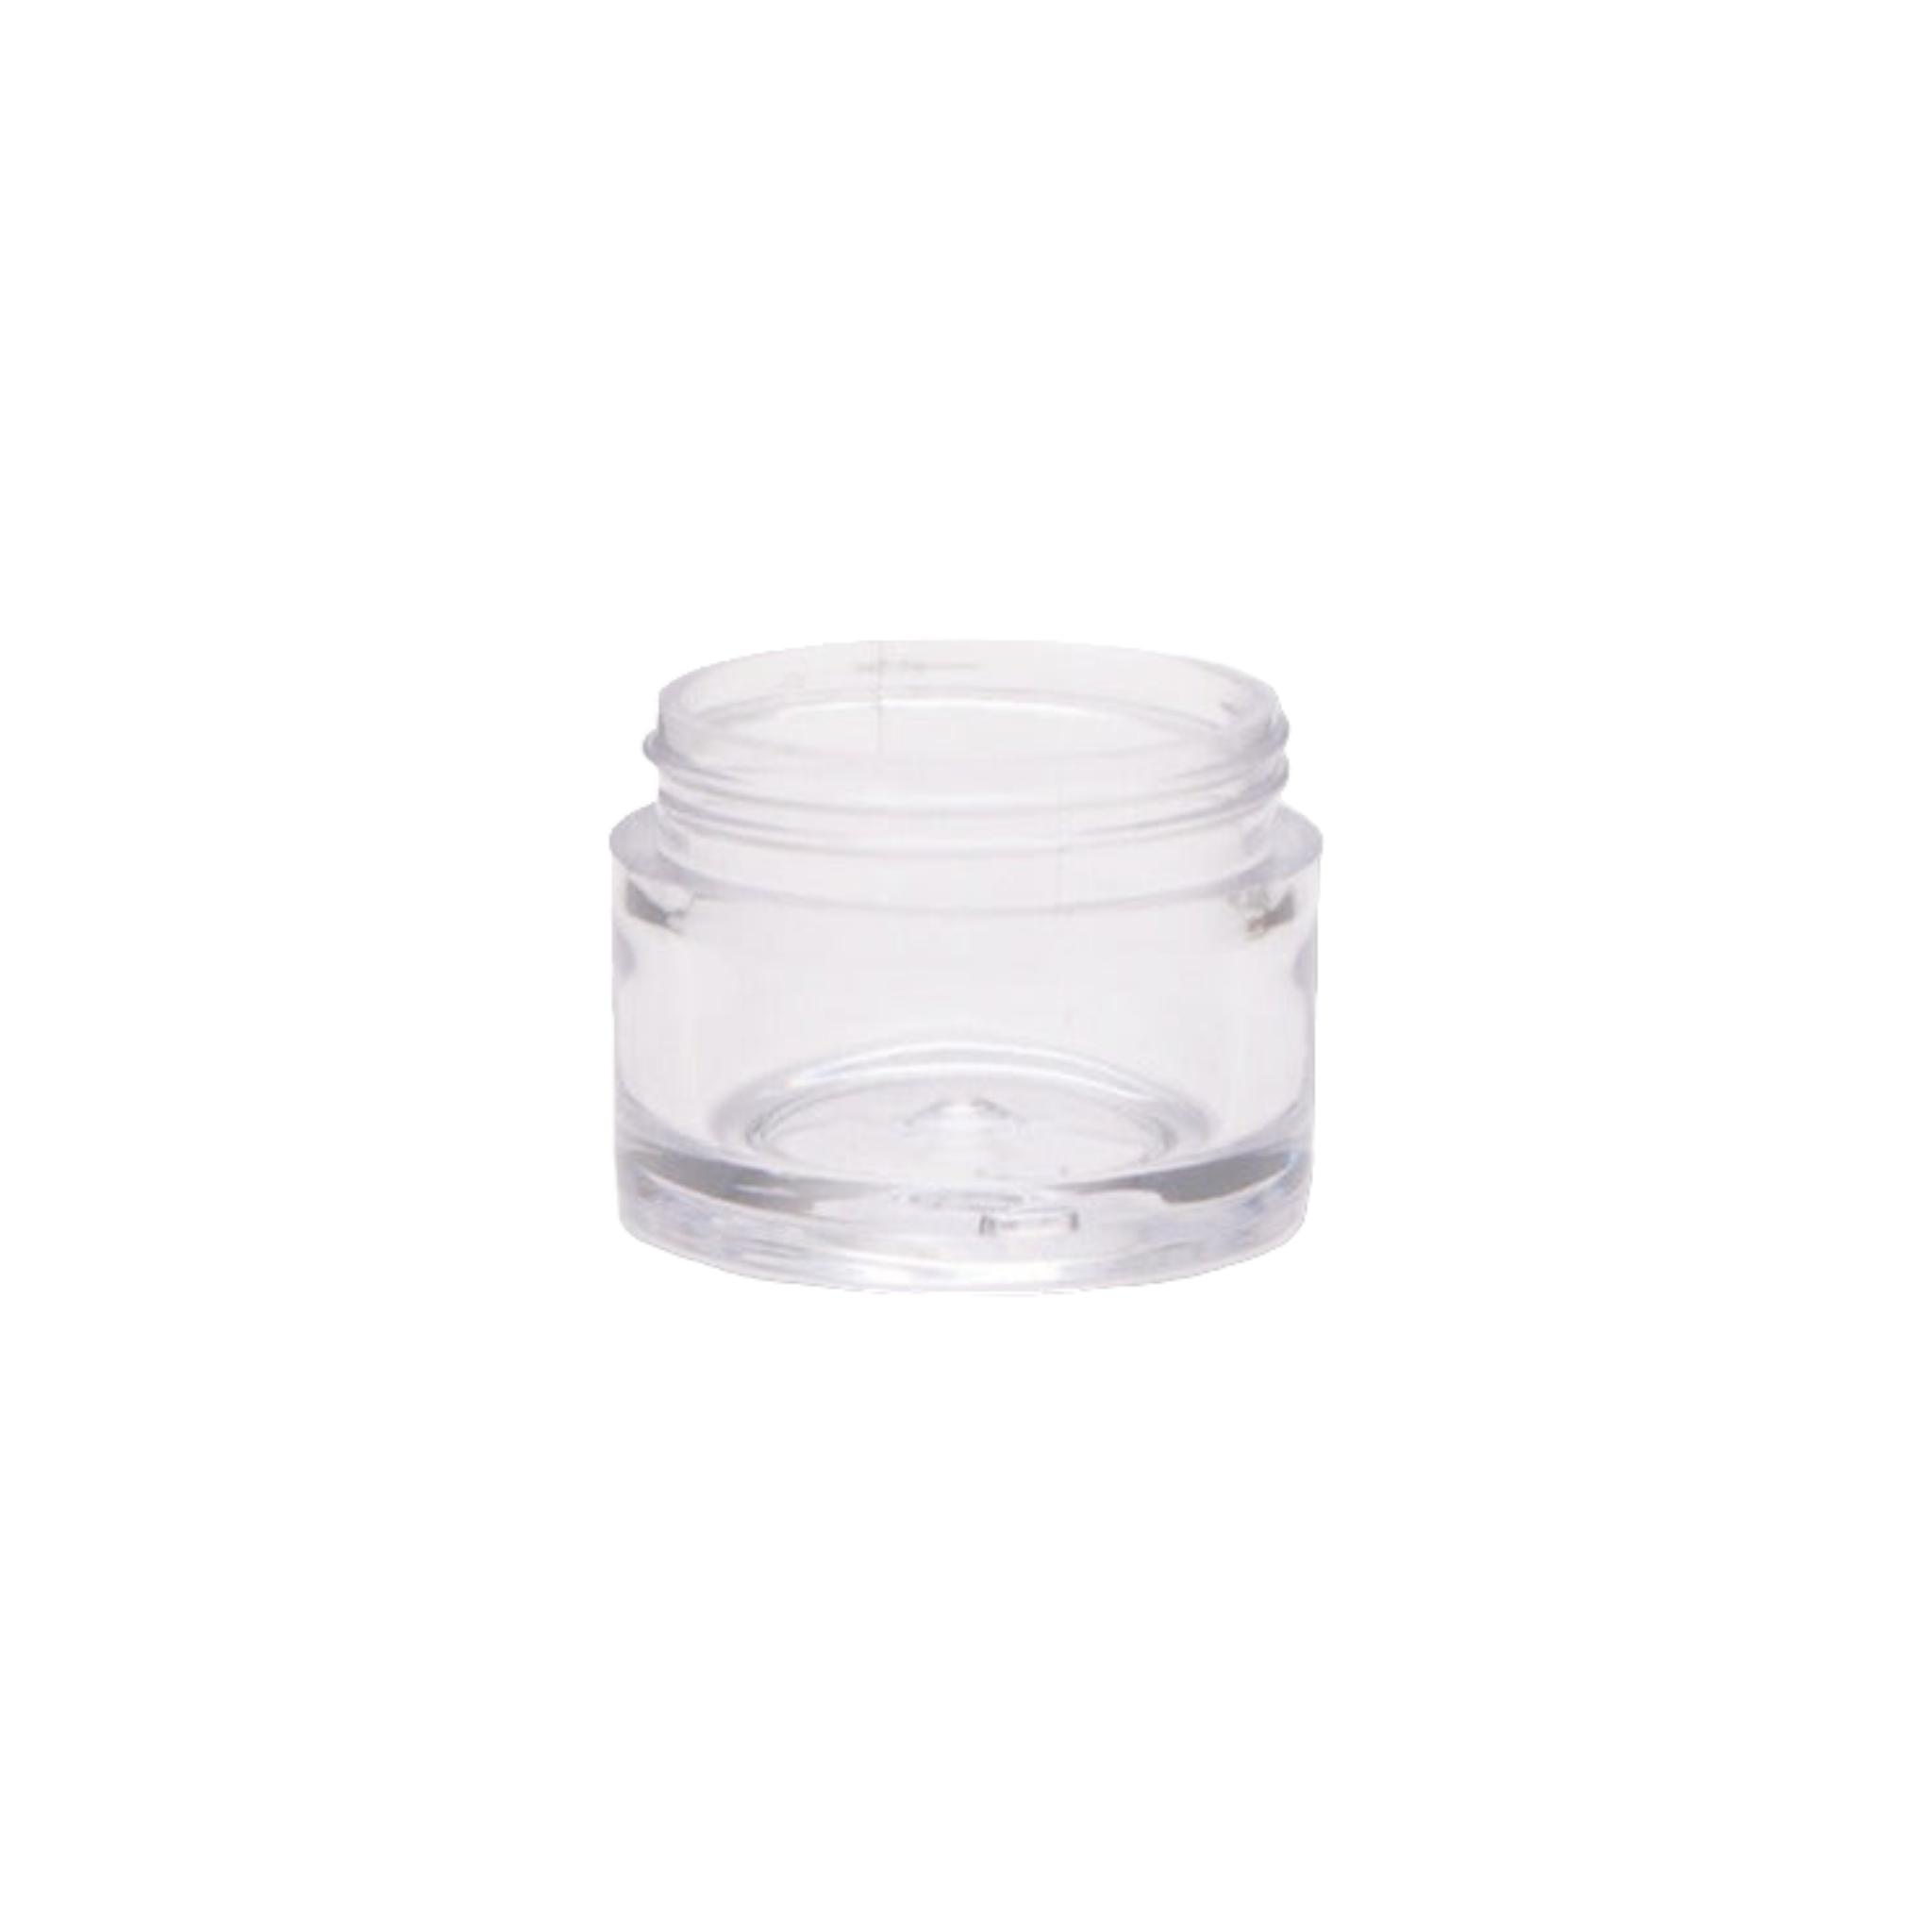 10ml PVC Plastic Cosmetic Jar with Black or White Lid